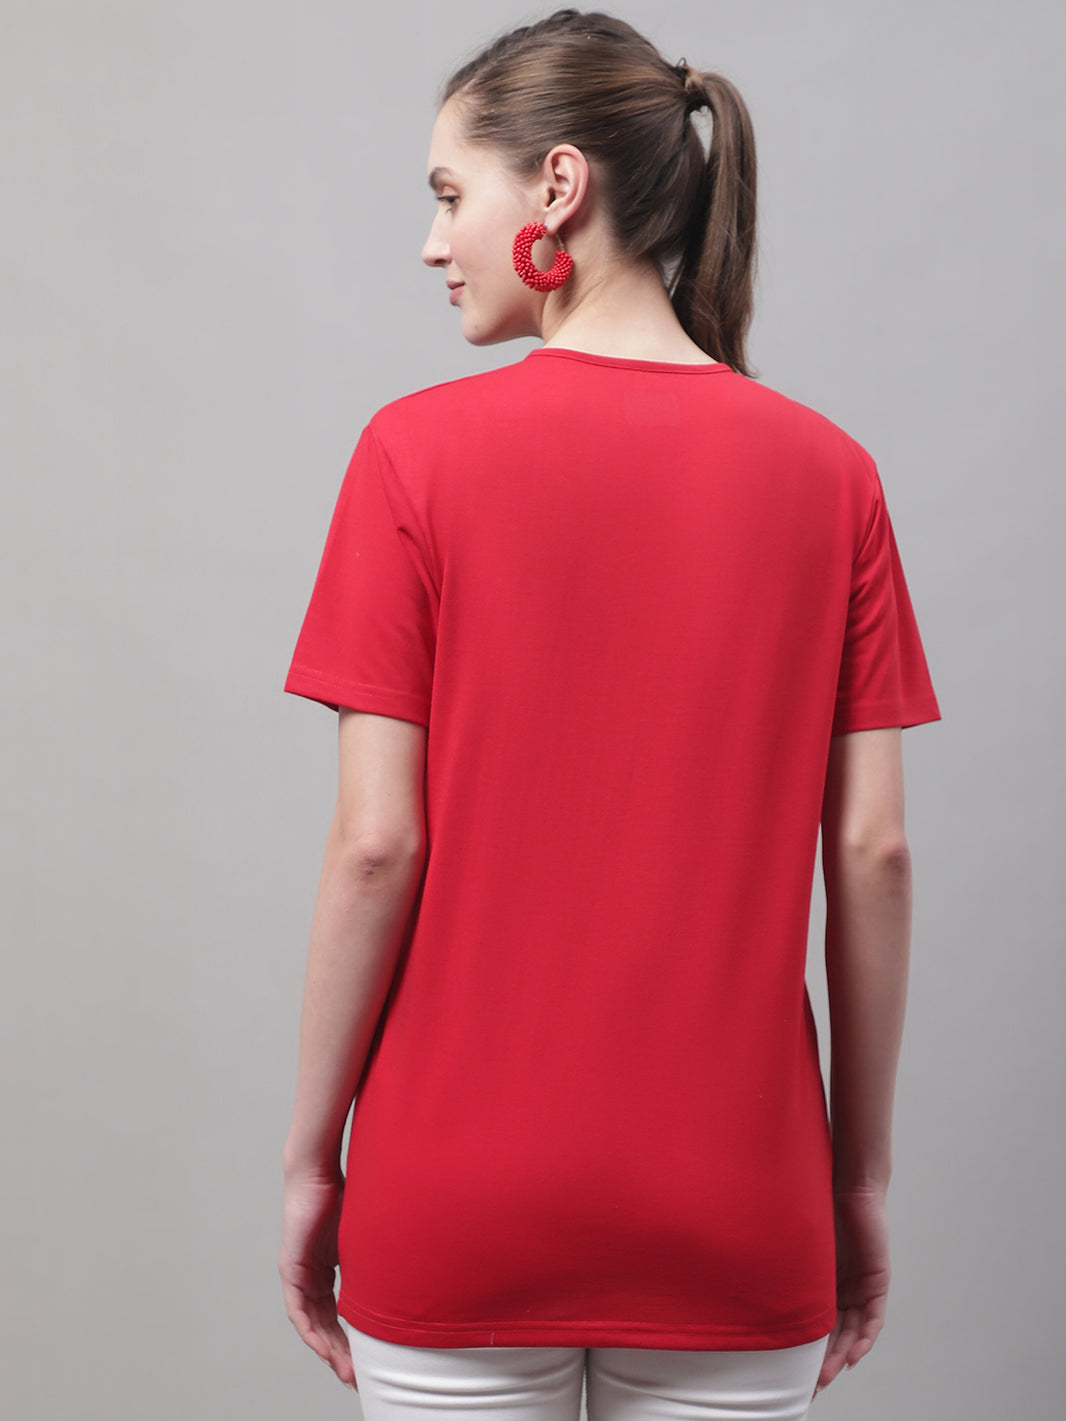 Vimal Jonney Round Neck Cotton Solid Red T-Shirt for Women